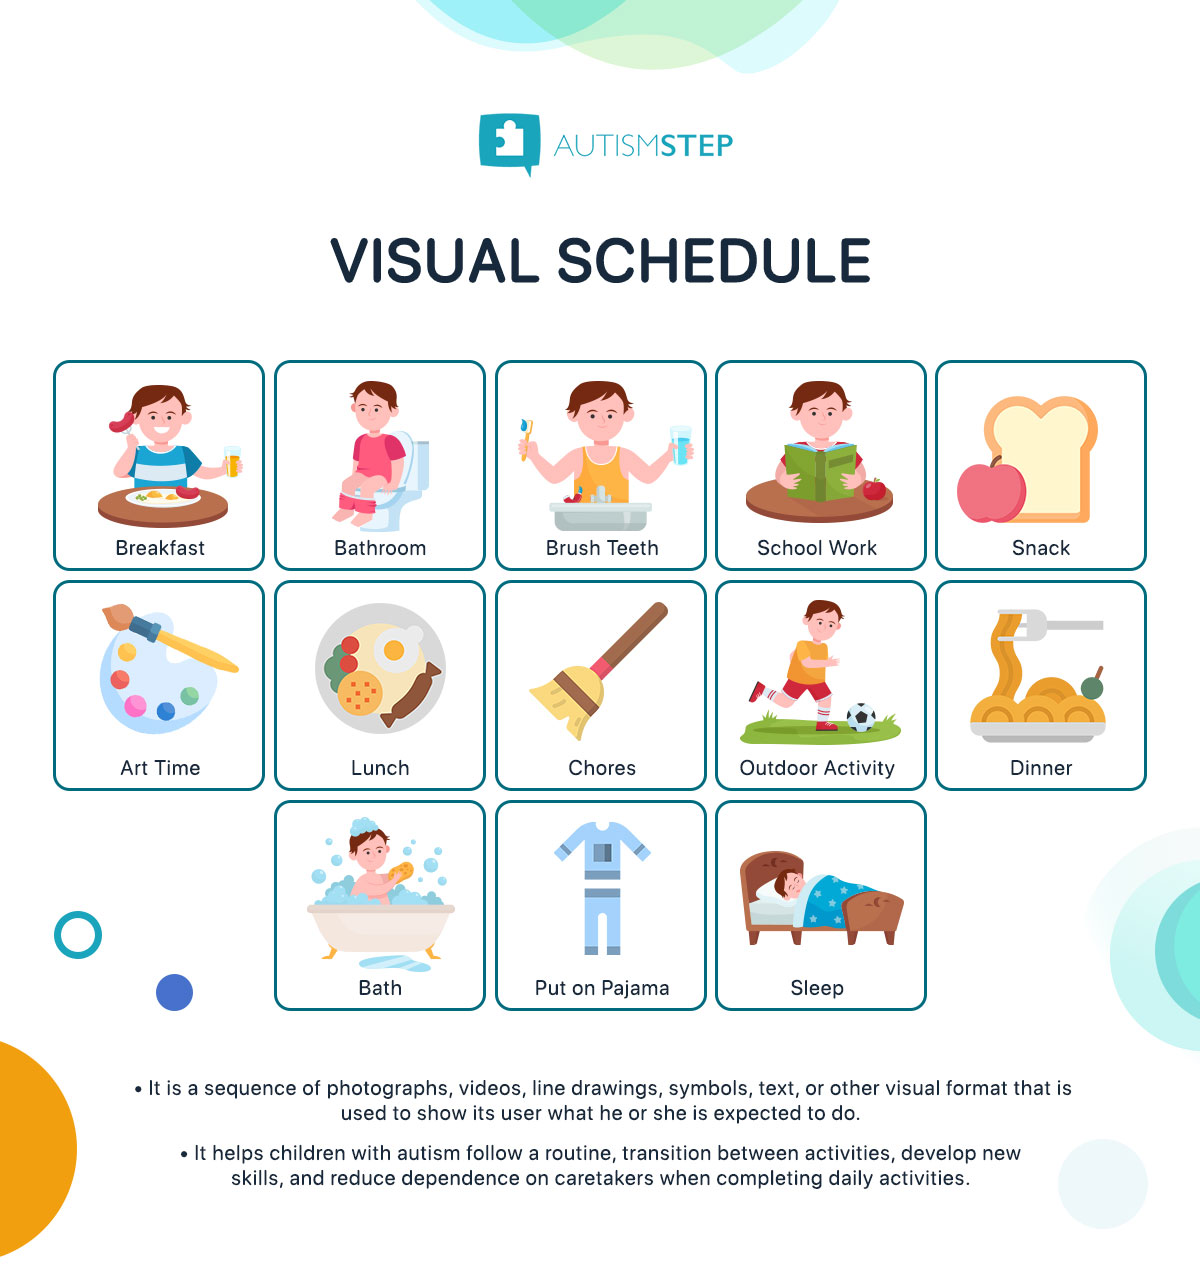 AutismSTEP Singapore - Visual Schedule for Children with Autism